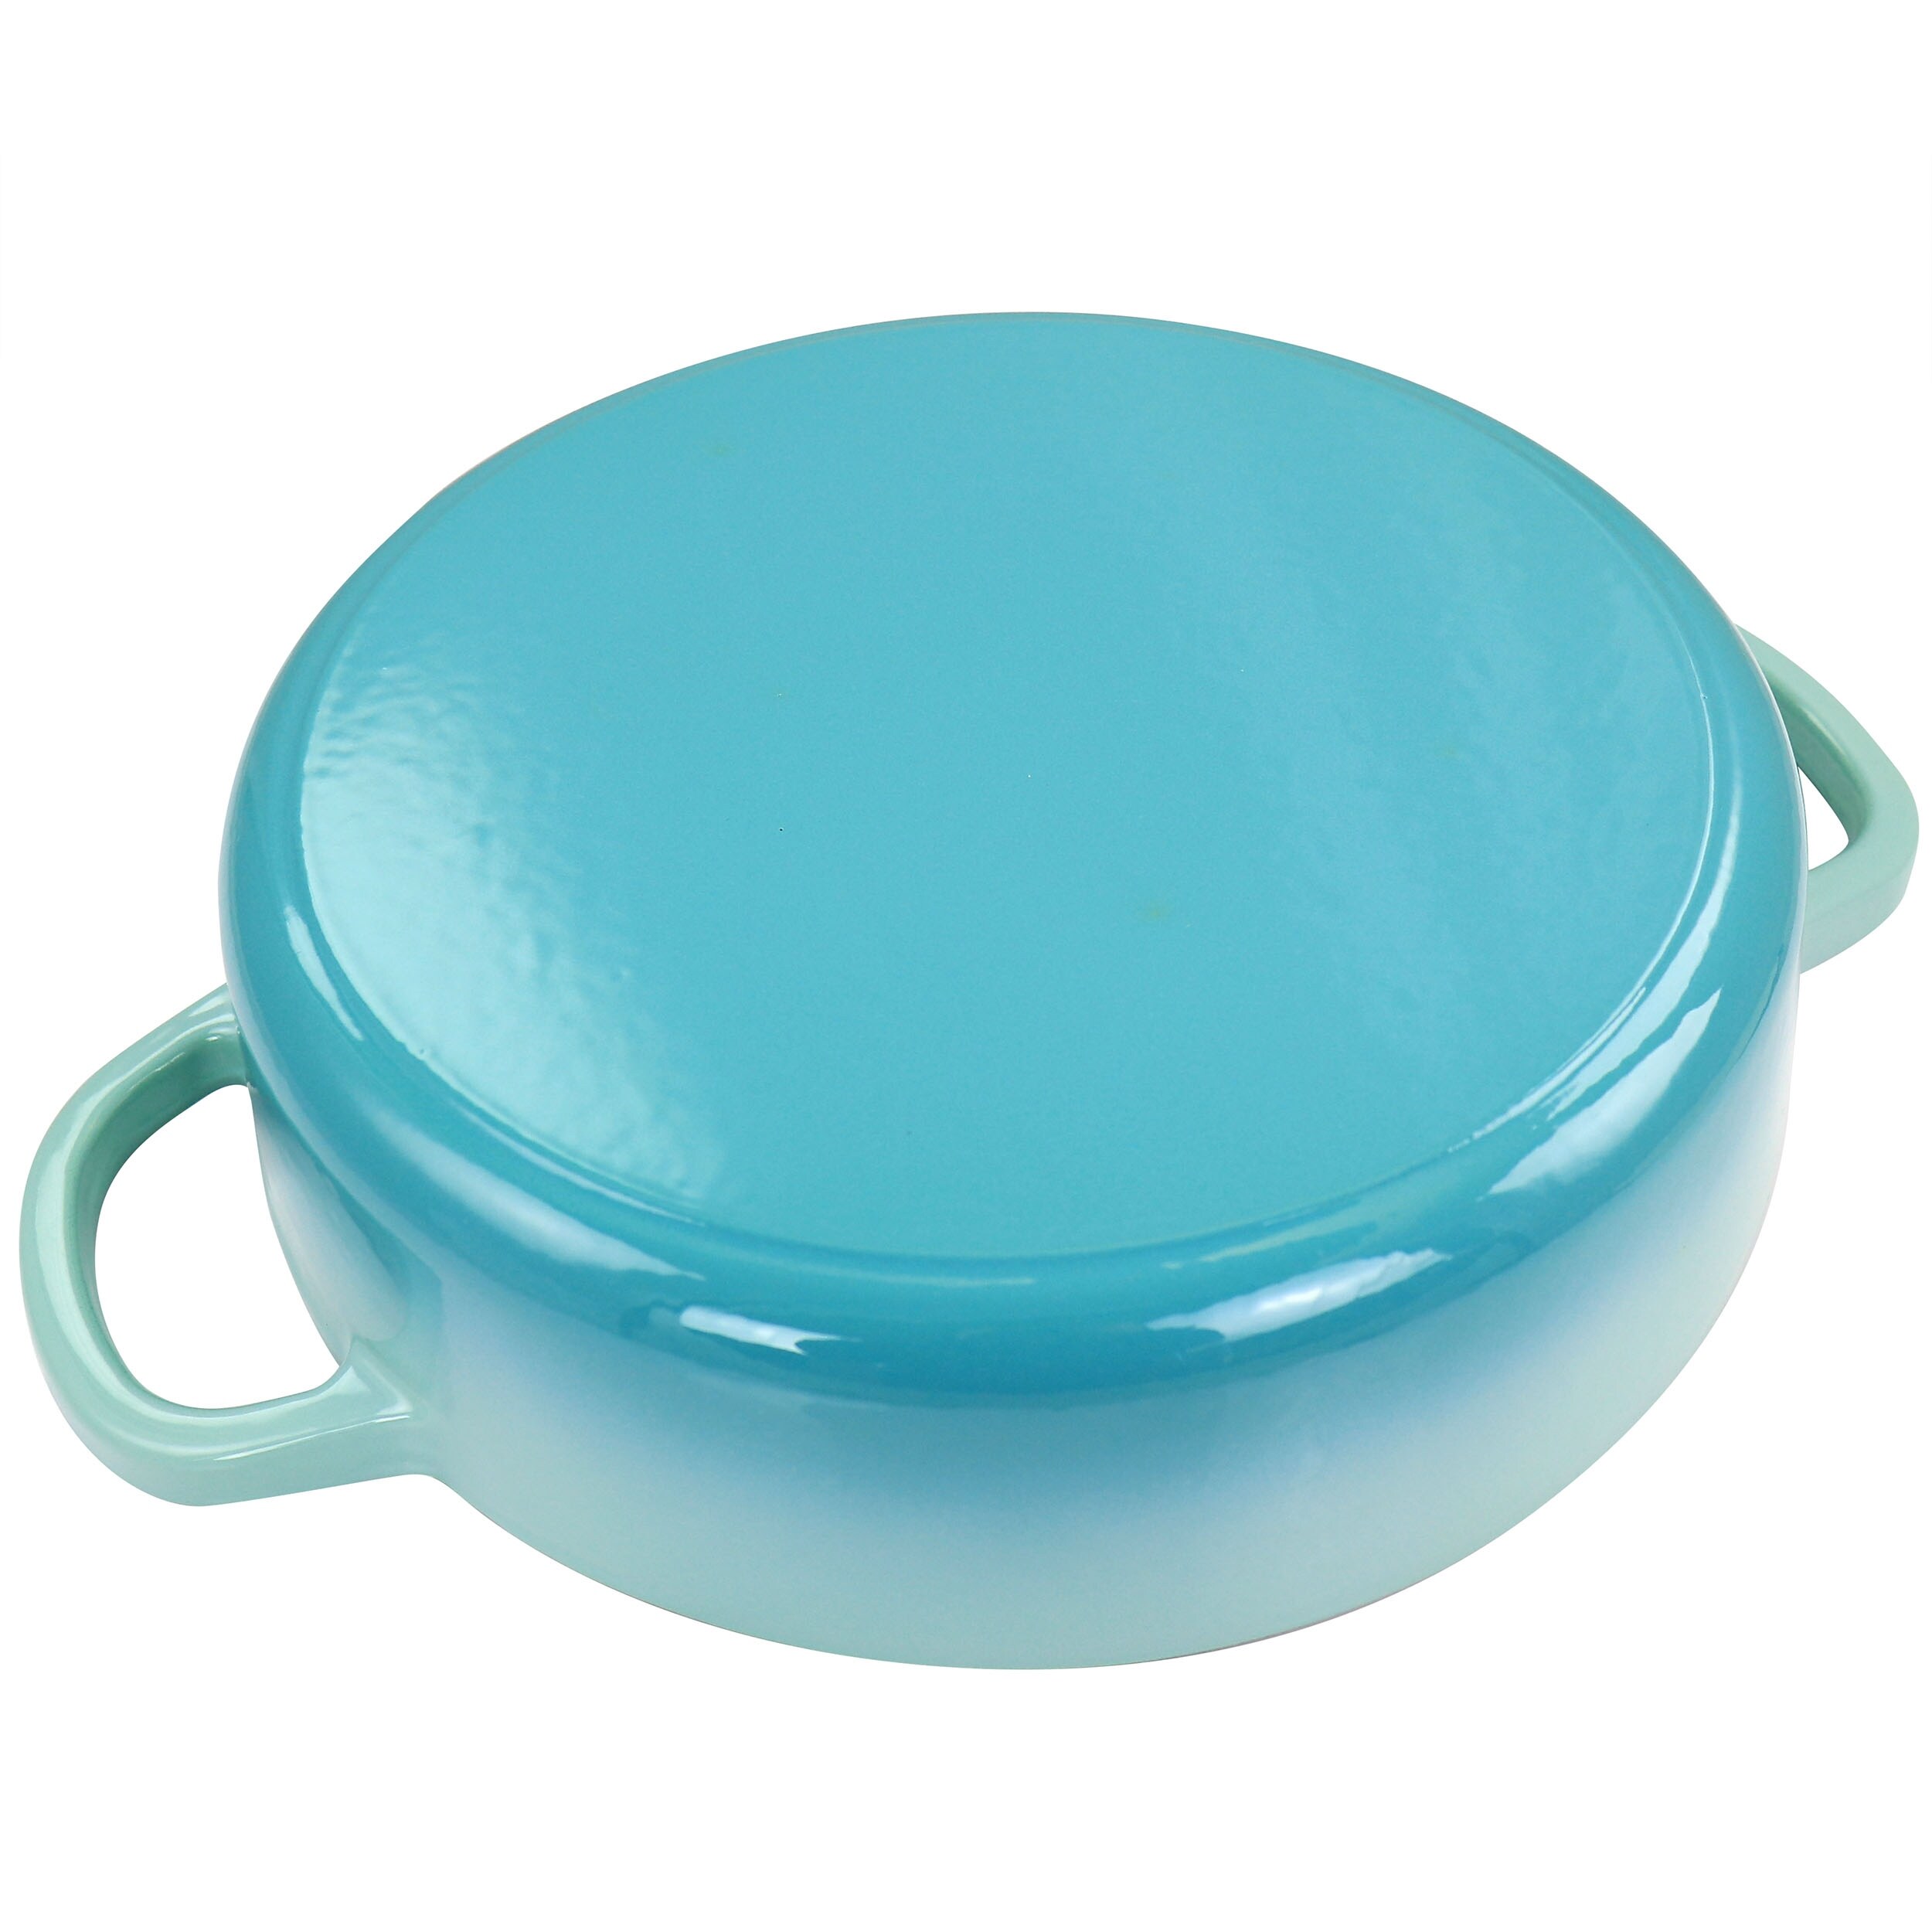 https://ak1.ostkcdn.com/images/products/is/images/direct/258d6f67b021a7916709336d3278d94595f12a71/5-Quart-Enameled-Cast-Iron-Braising-Pan-with-Lid-in-Arctic-Sky.jpg